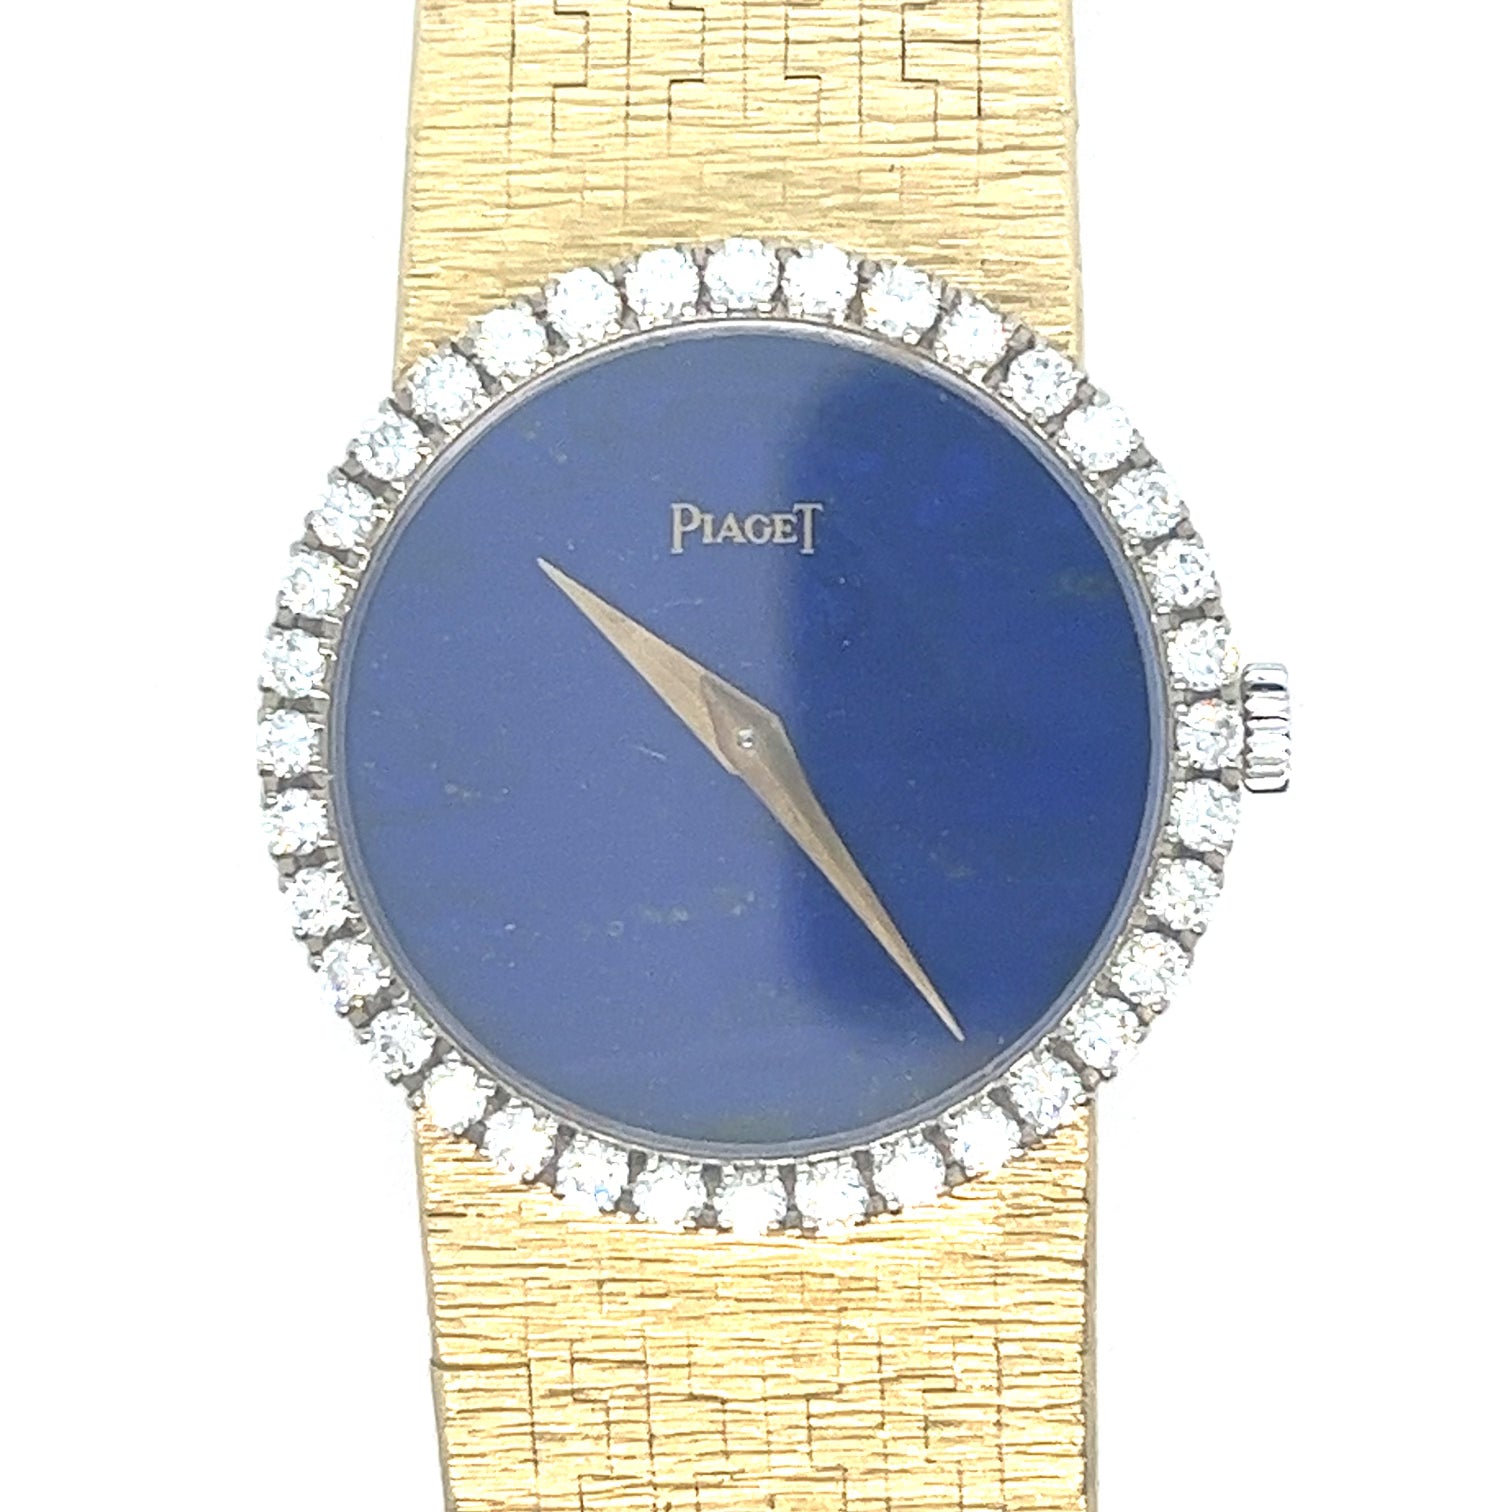 18kt Gold Piaget Reference 9706 Lapis Dial